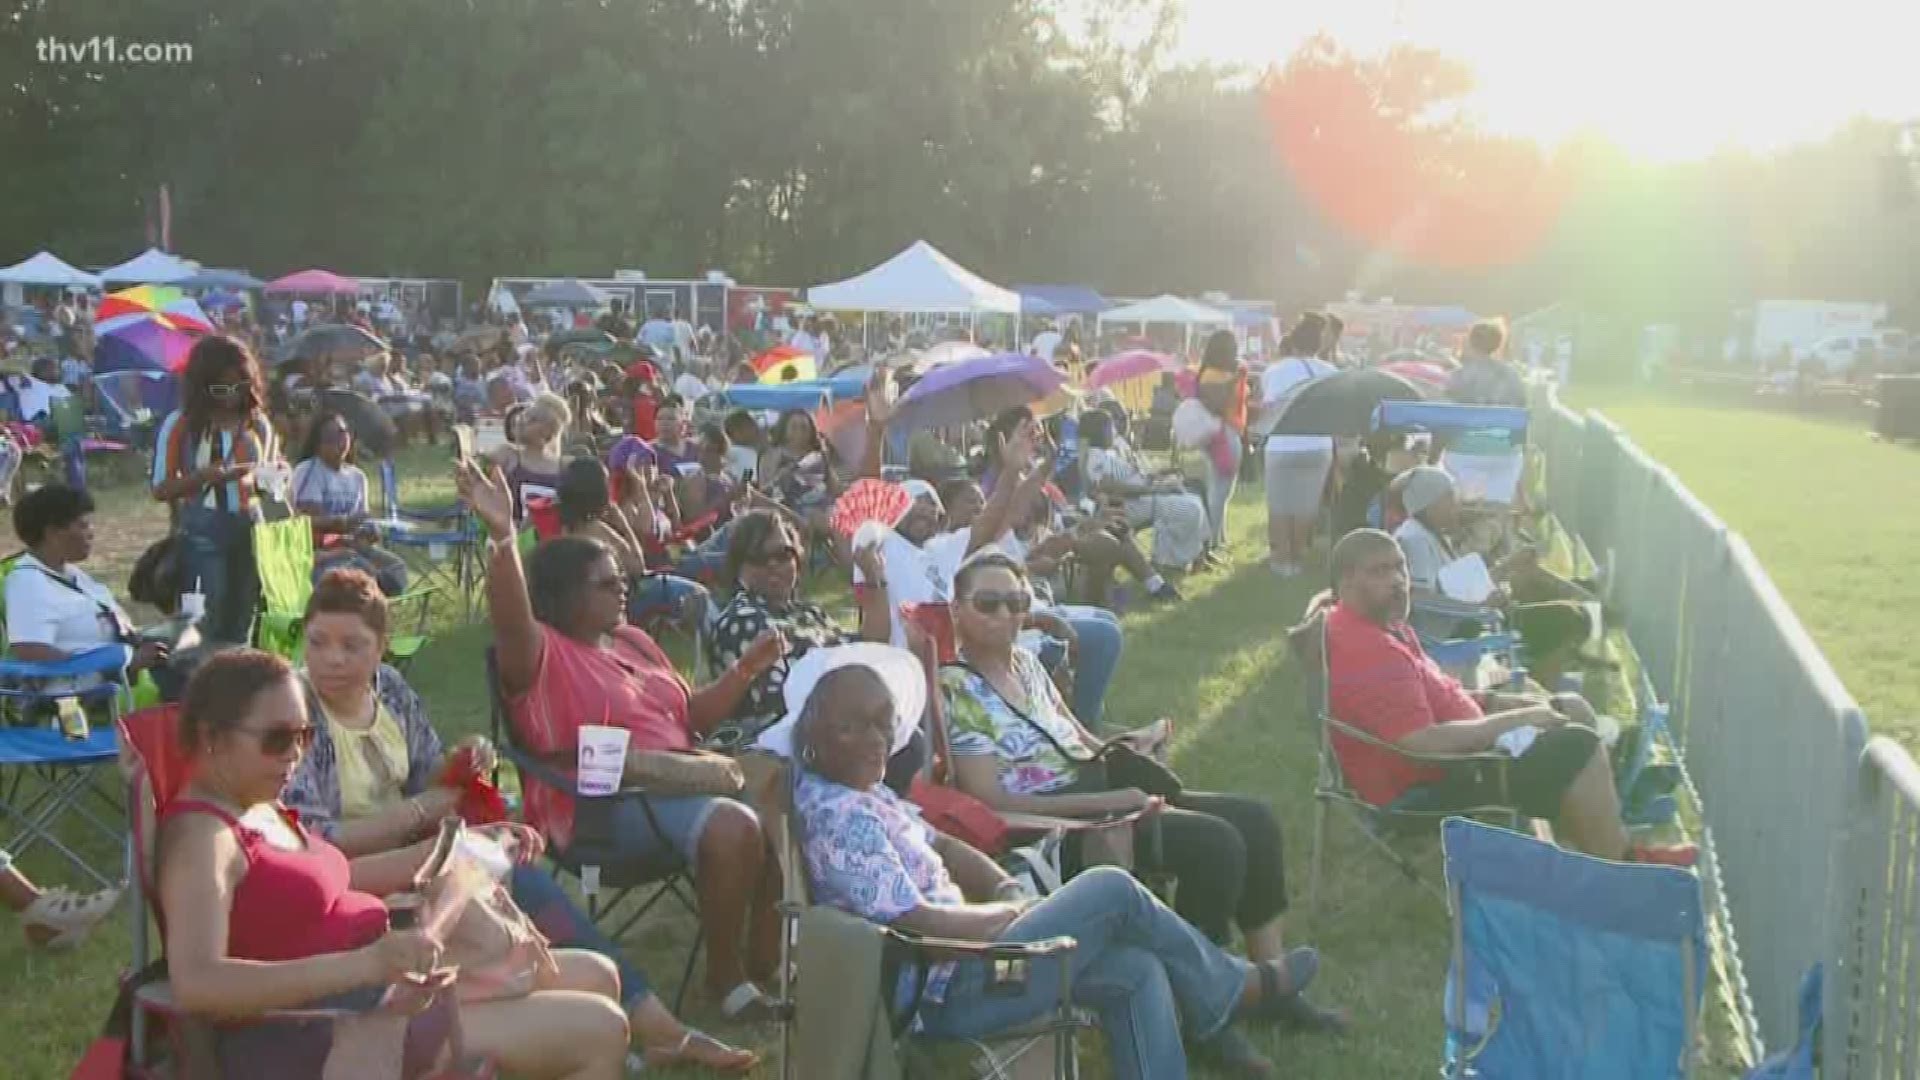 Go Forward Pine Bluff celebrated its second annual Forward Fest: Blues, Batter and Brew 2019 today with live music, food, and a firework display.